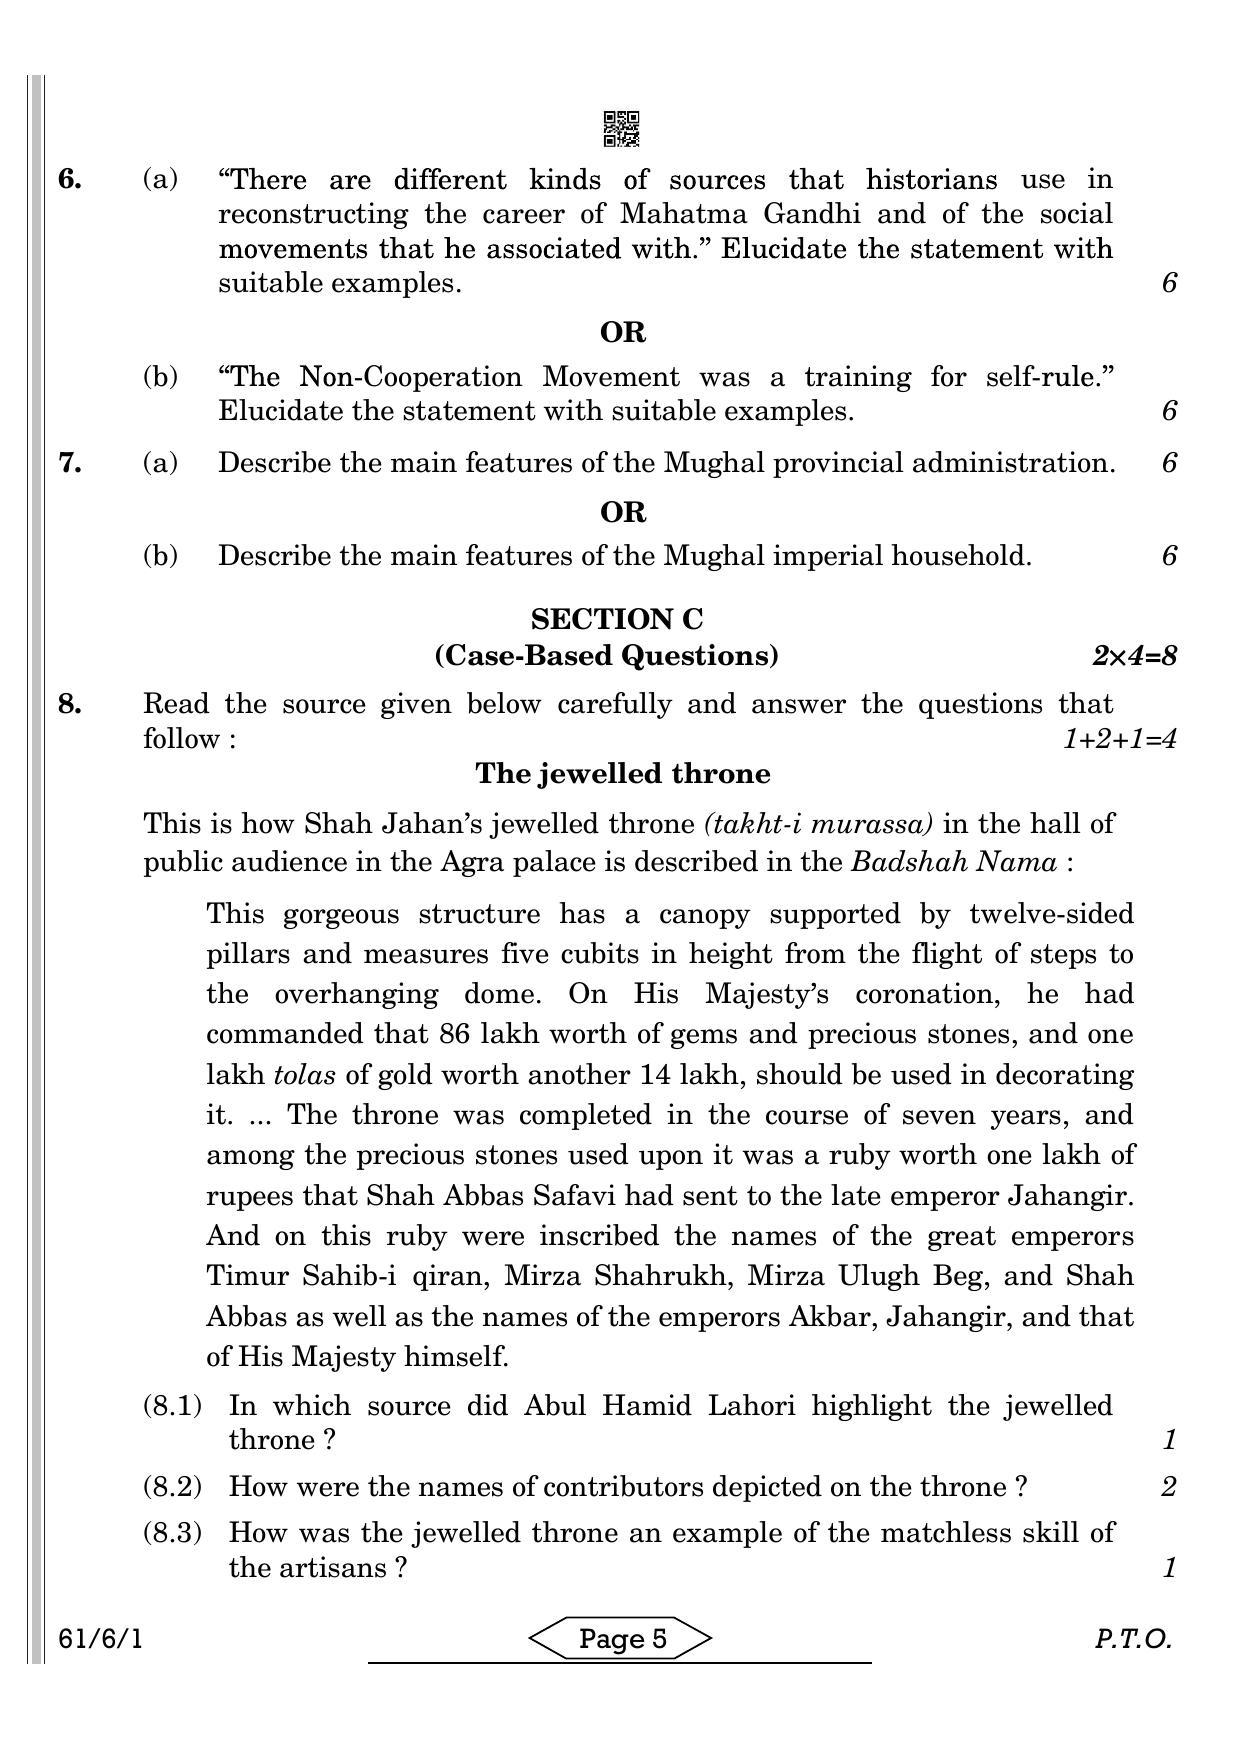 CBSE Class 12 61-6-1 HISTORY 2022 Compartment Question Paper - Page 5